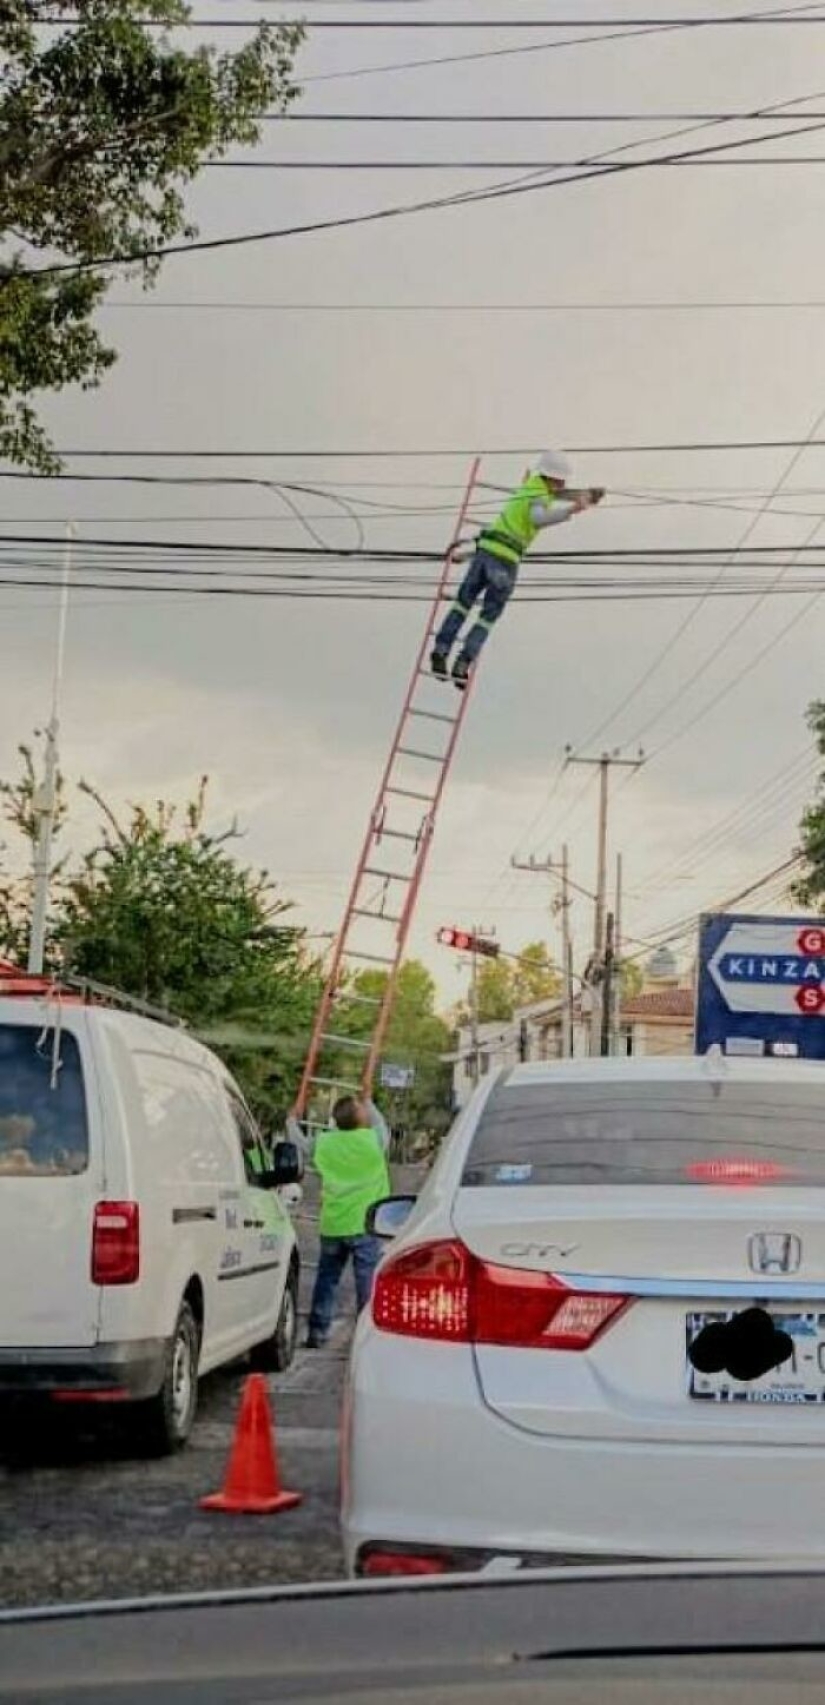 30 times when people spat on safety